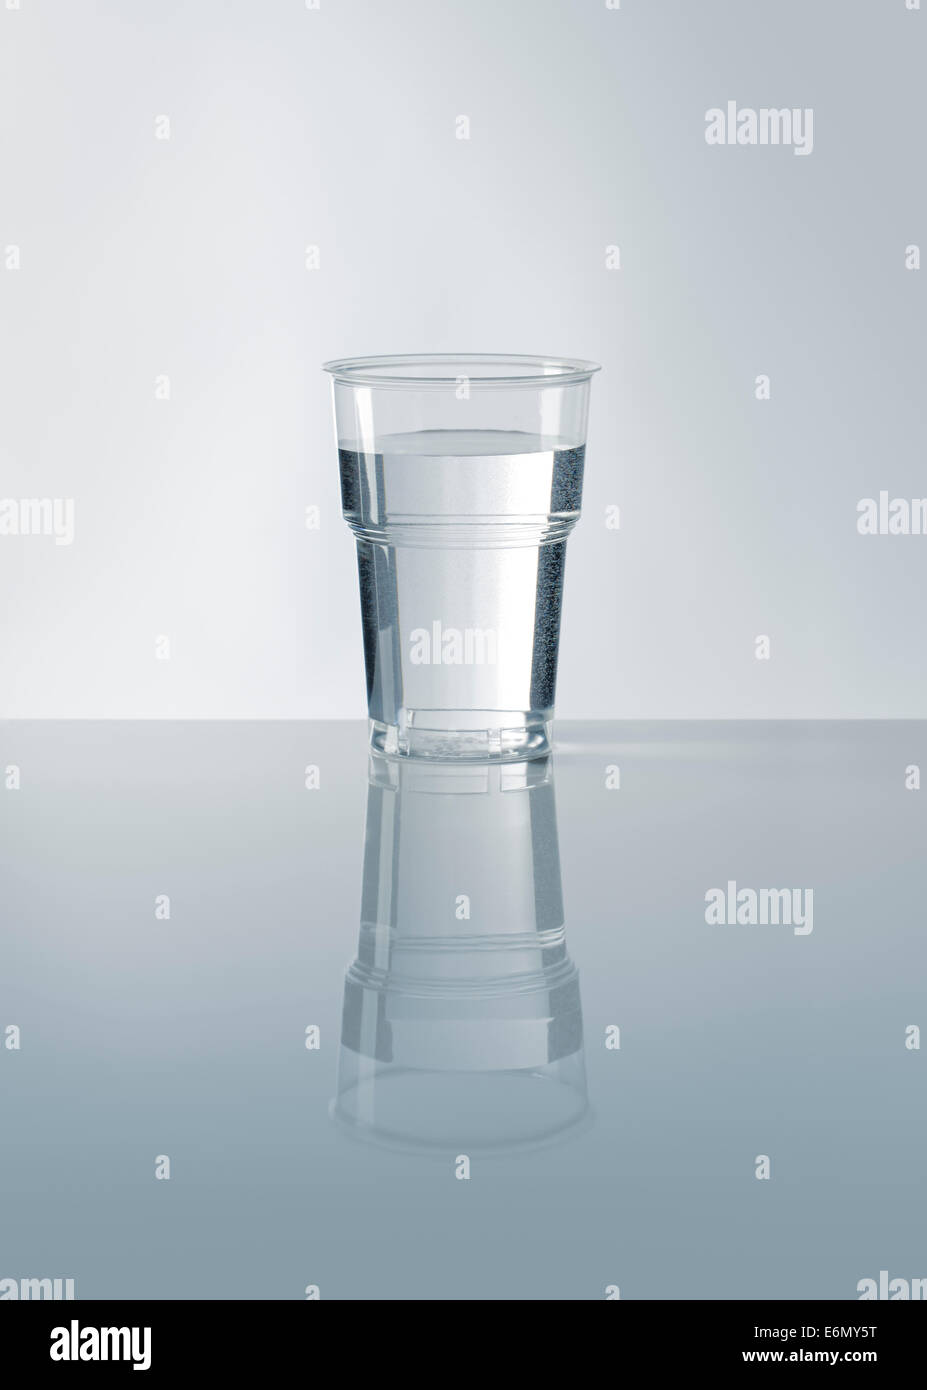 A Disposable plastic cup filled with water. Stock Photo